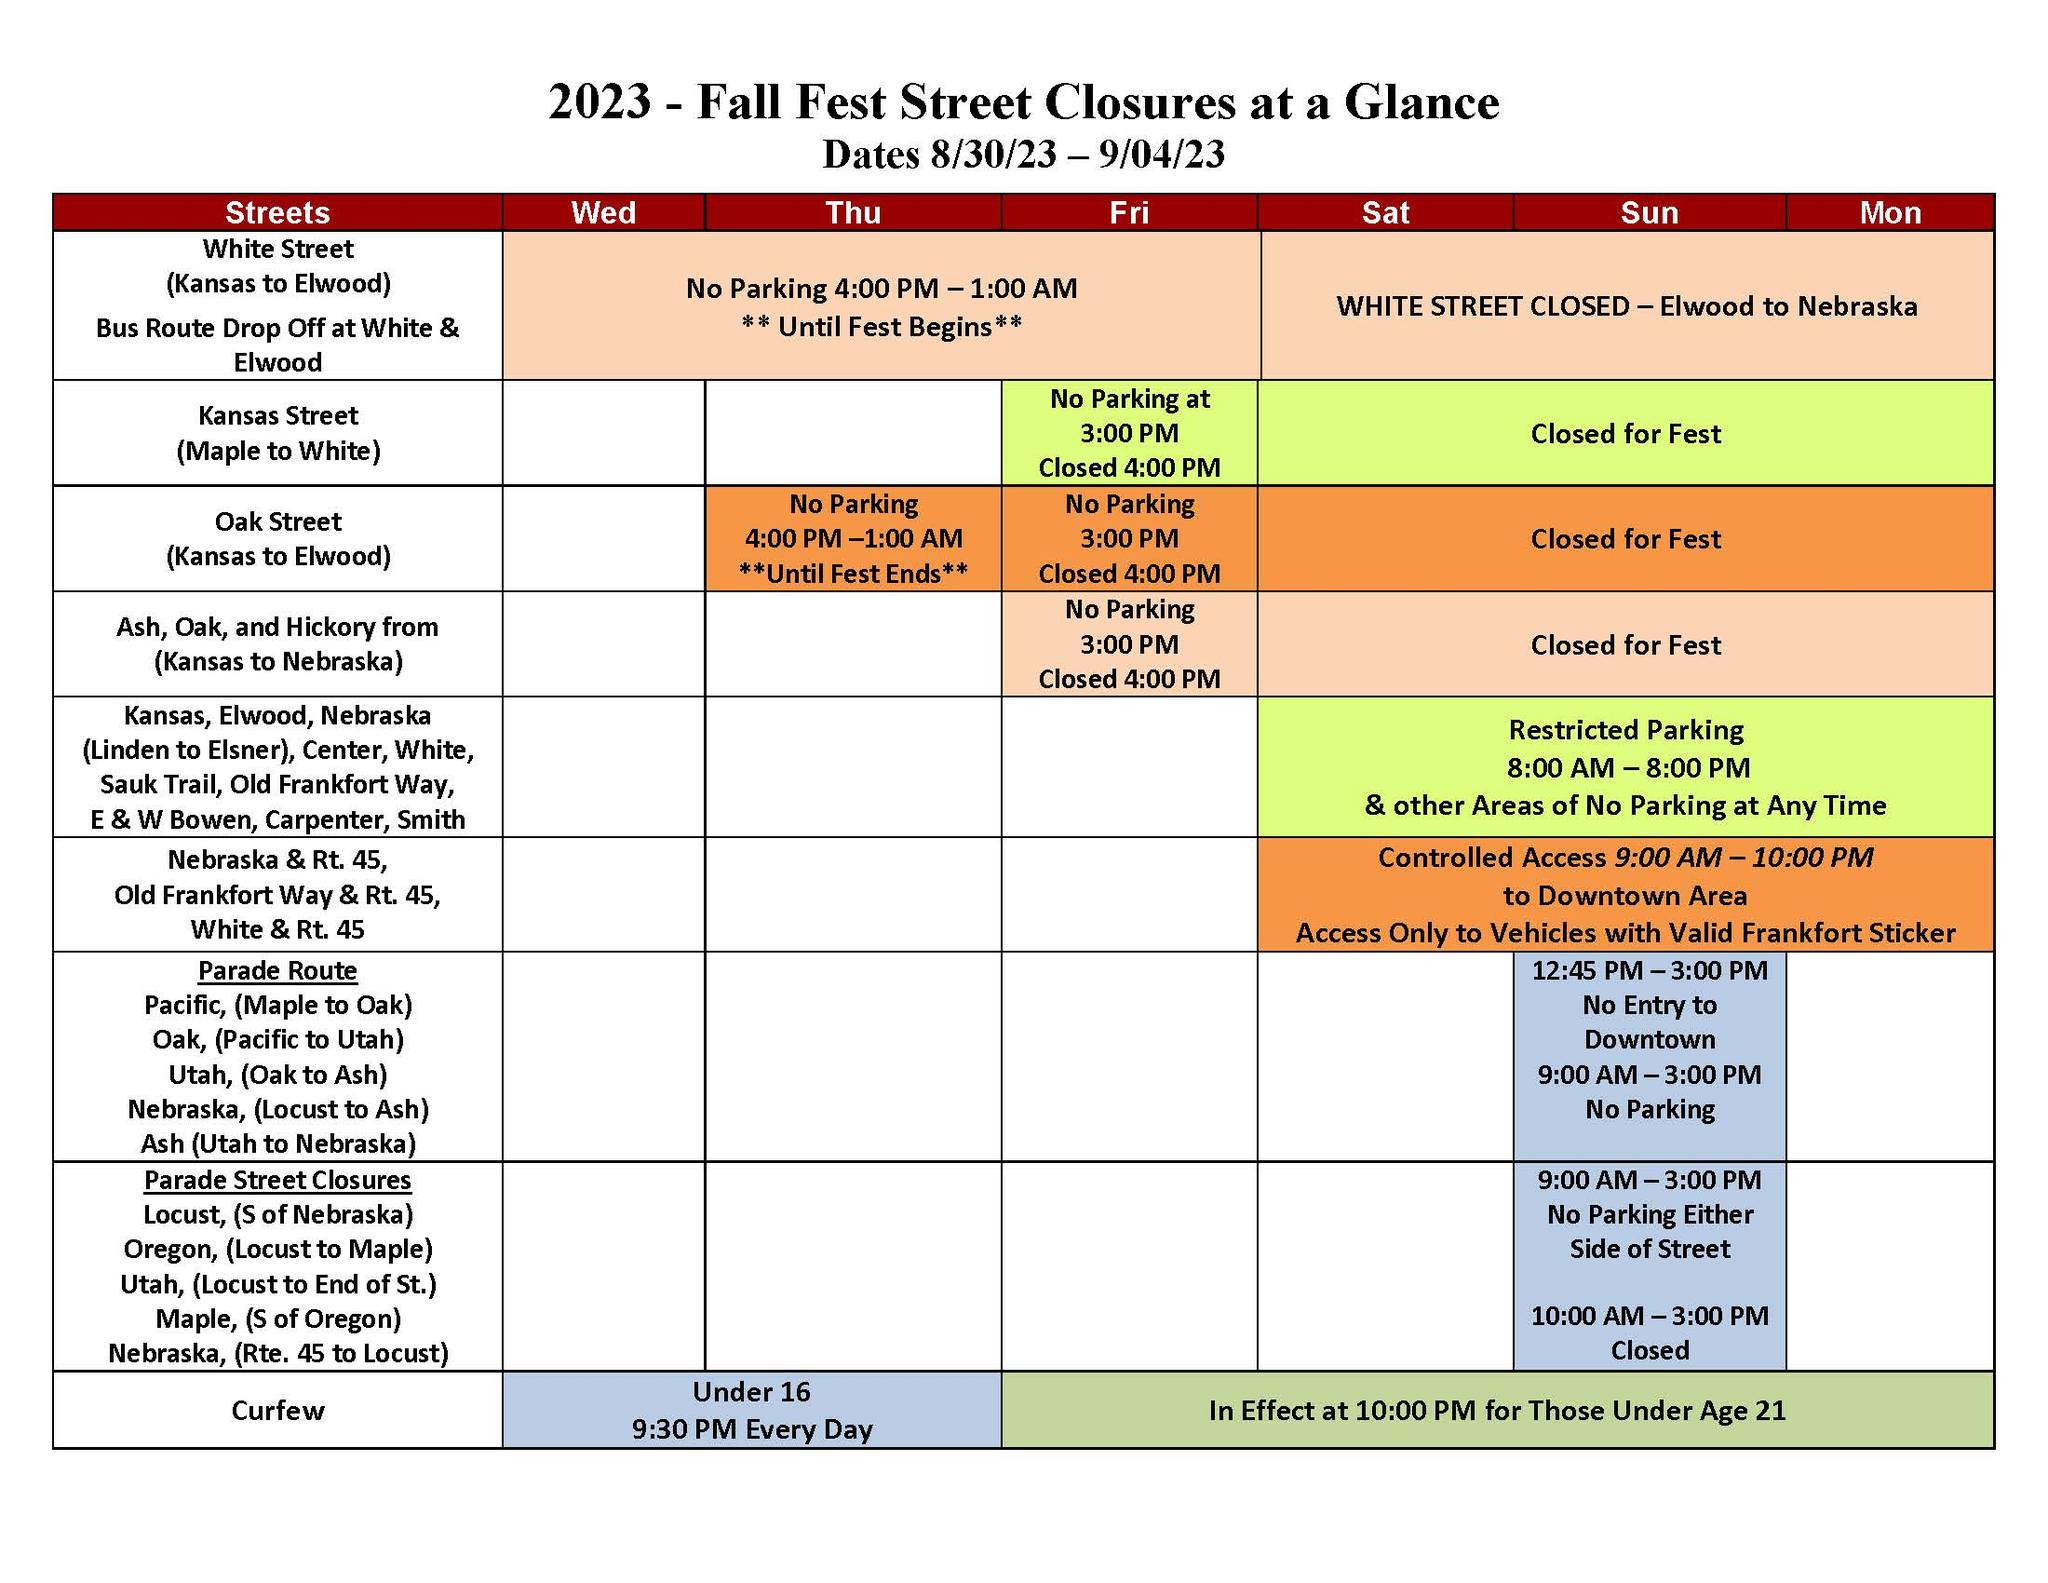 Street Closures at a Glance_Fall Fest 2023